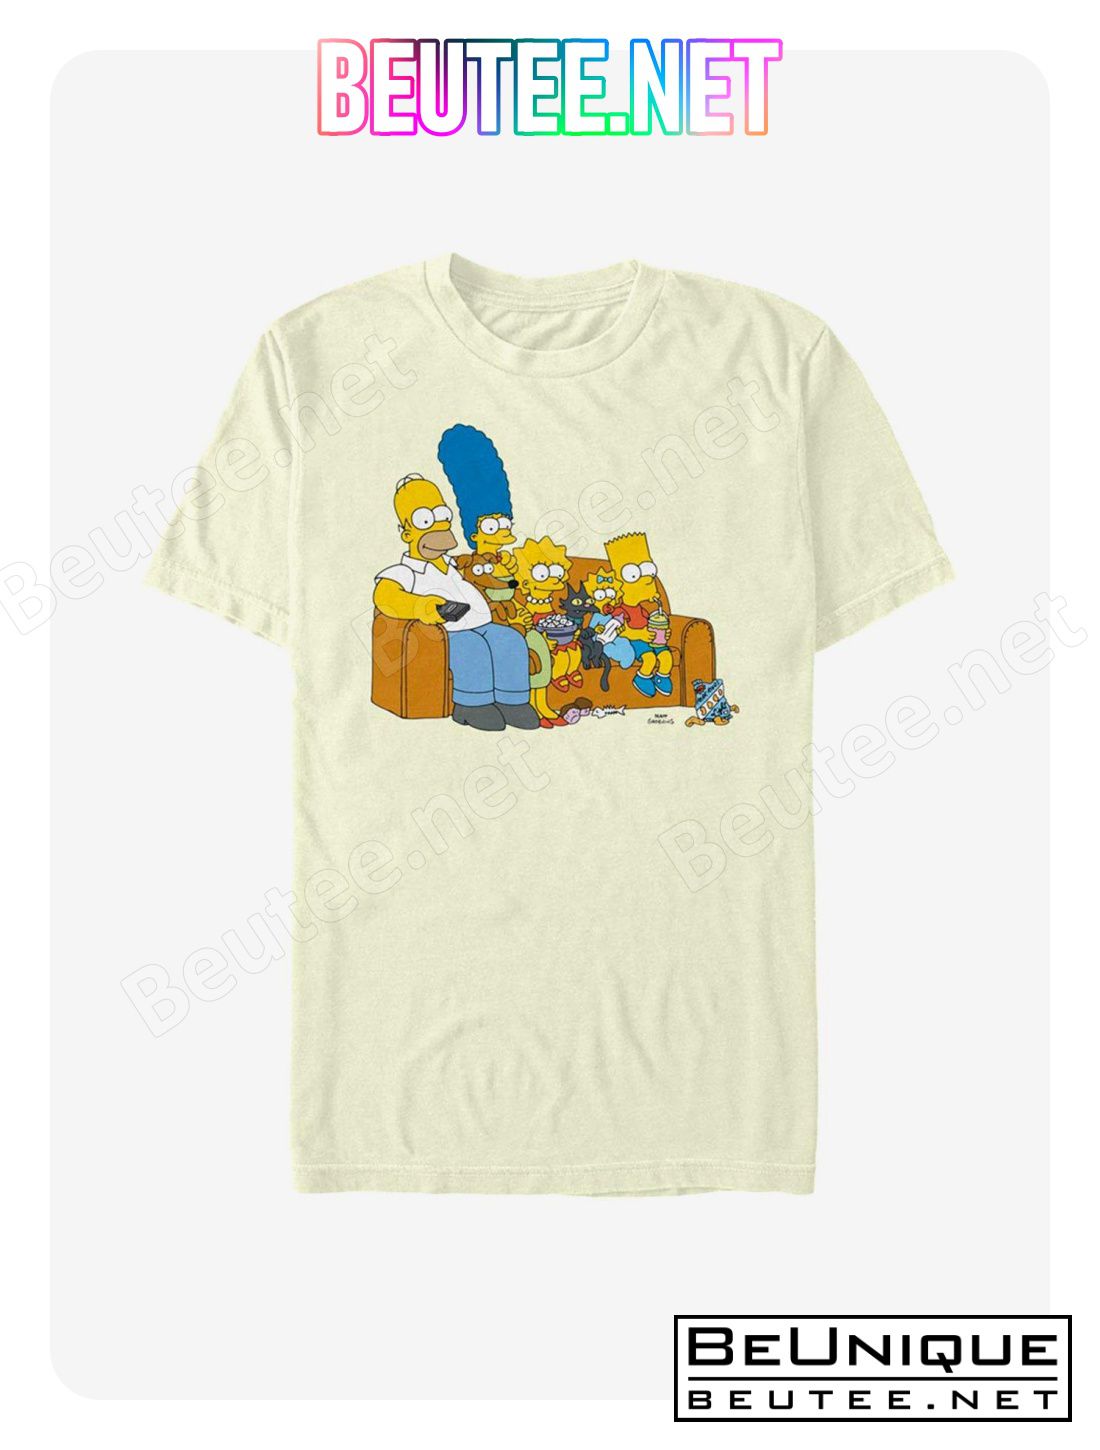 The Simpsons Family Couch T-Shirt